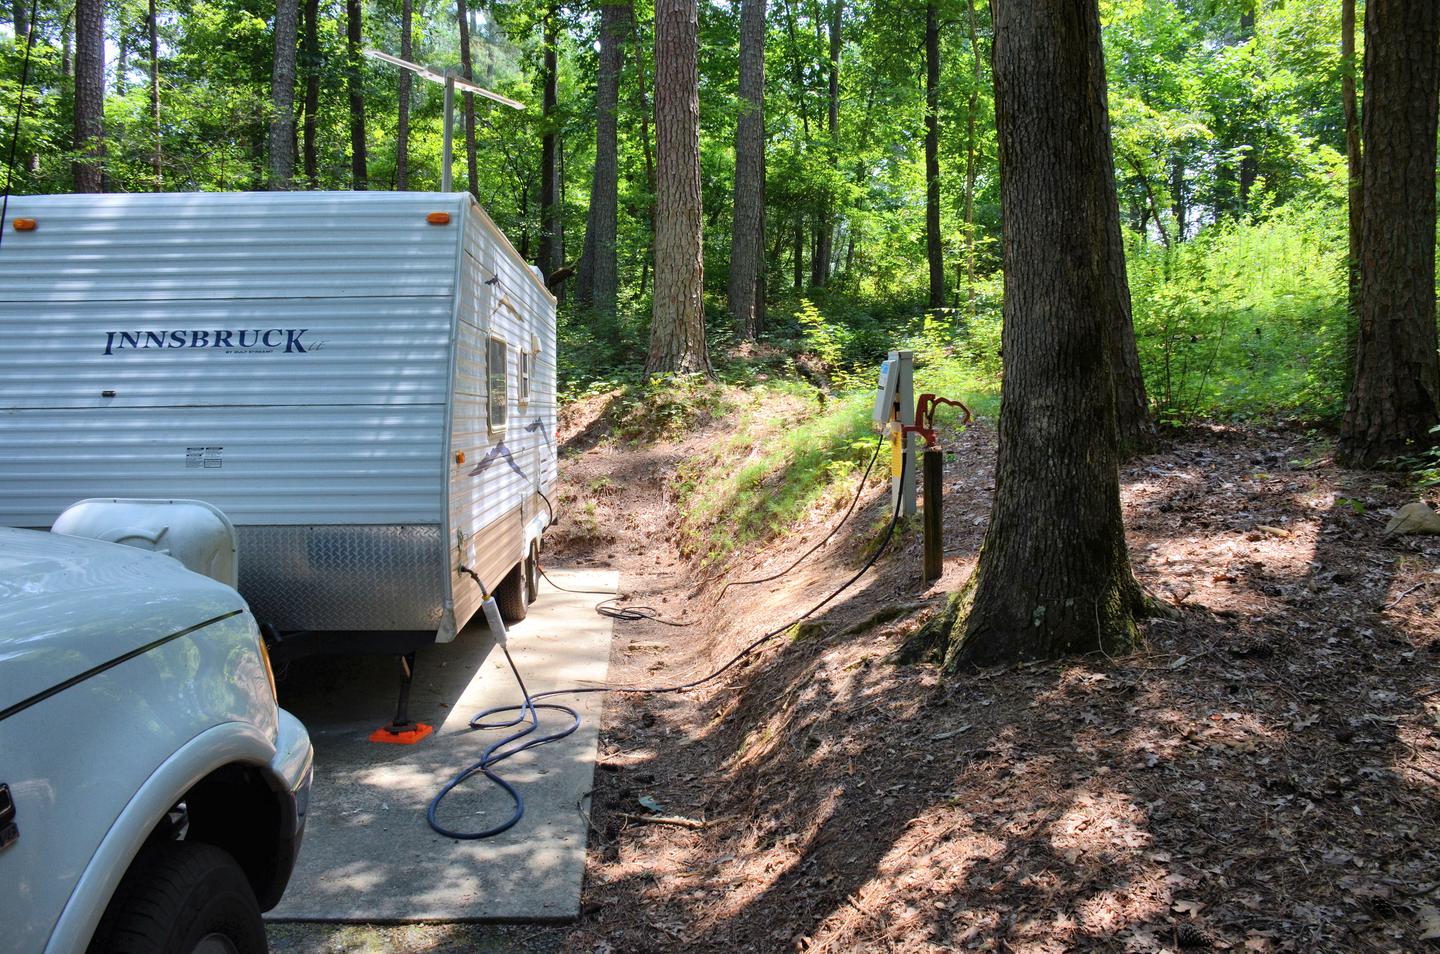 Utilities side clearanceMcKaskey Creek Campground, campsite 25.  Bring sturdy shoes to hook up utilities.